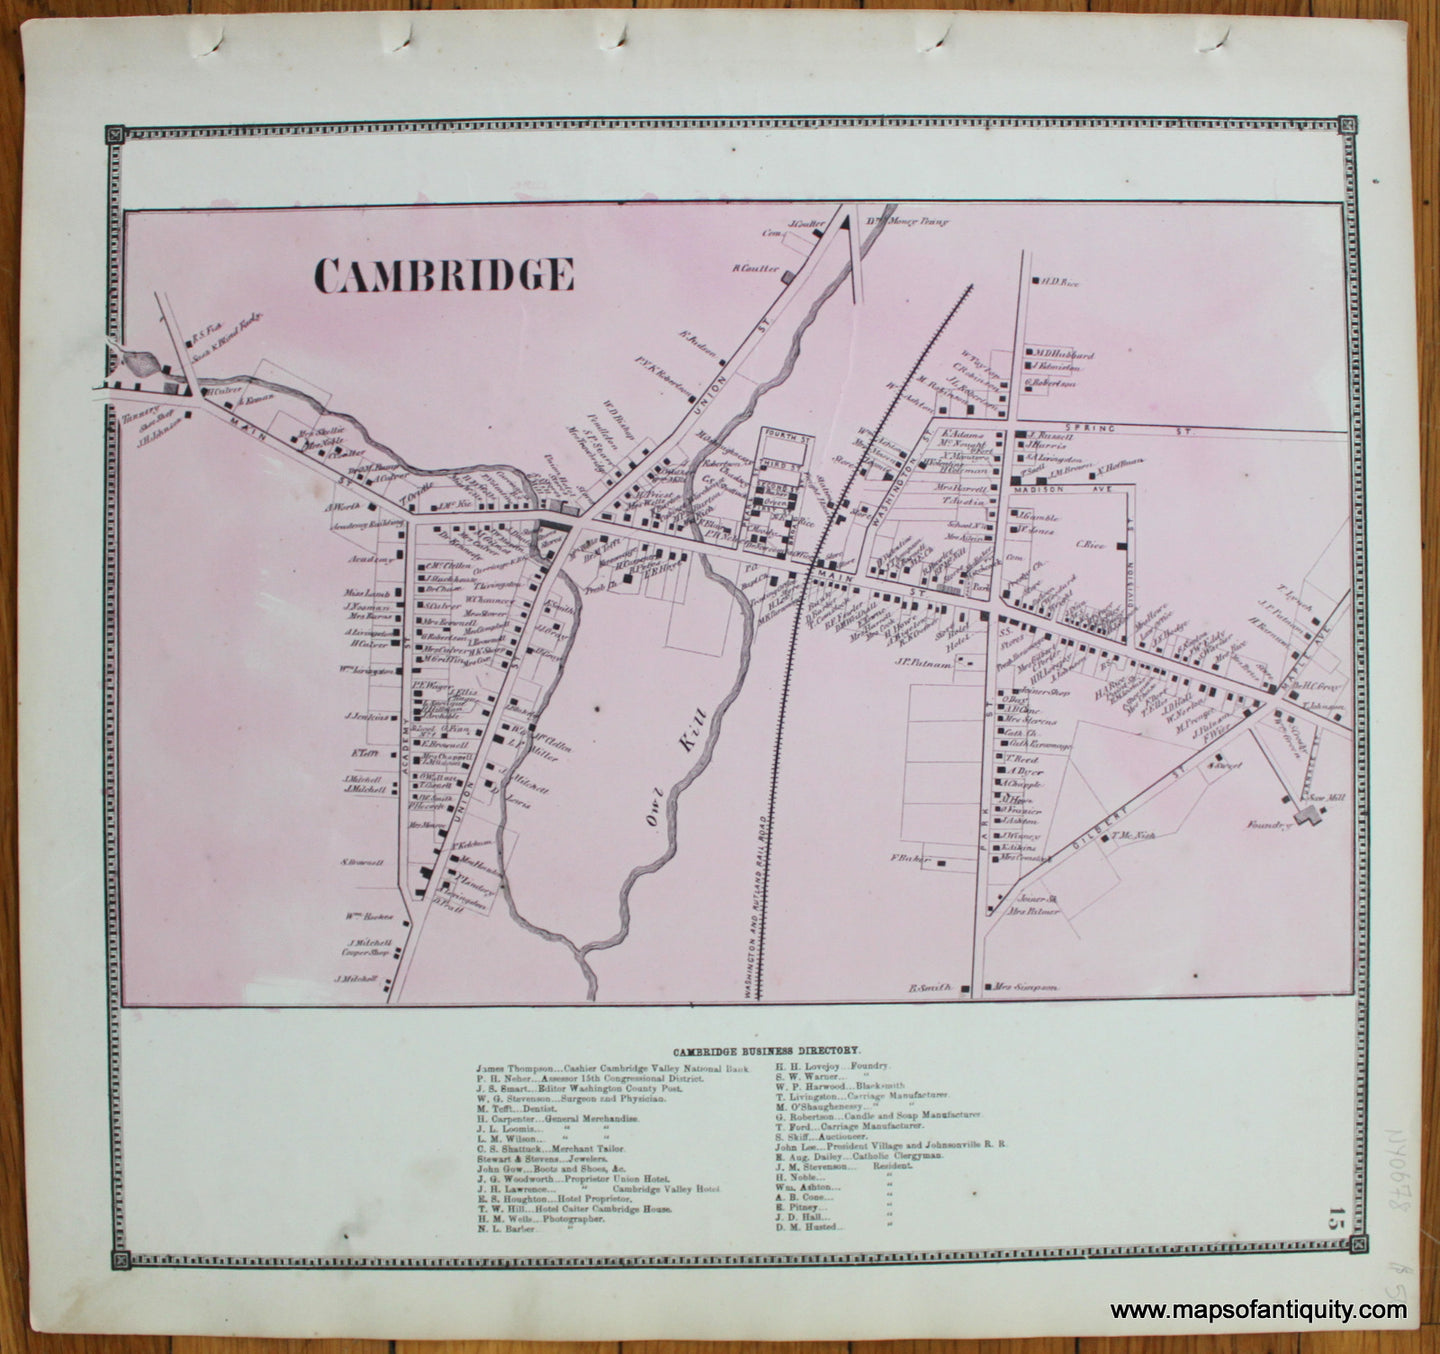 Antique-Map-Town-Towns-Cambridge-New-Topographical-Atlas-of-Washington-County-New-York-by-Stone-and-Stewart-1866-1860s-1800s-Mid-Late-19th-Century-Maps-of-Antiquity-